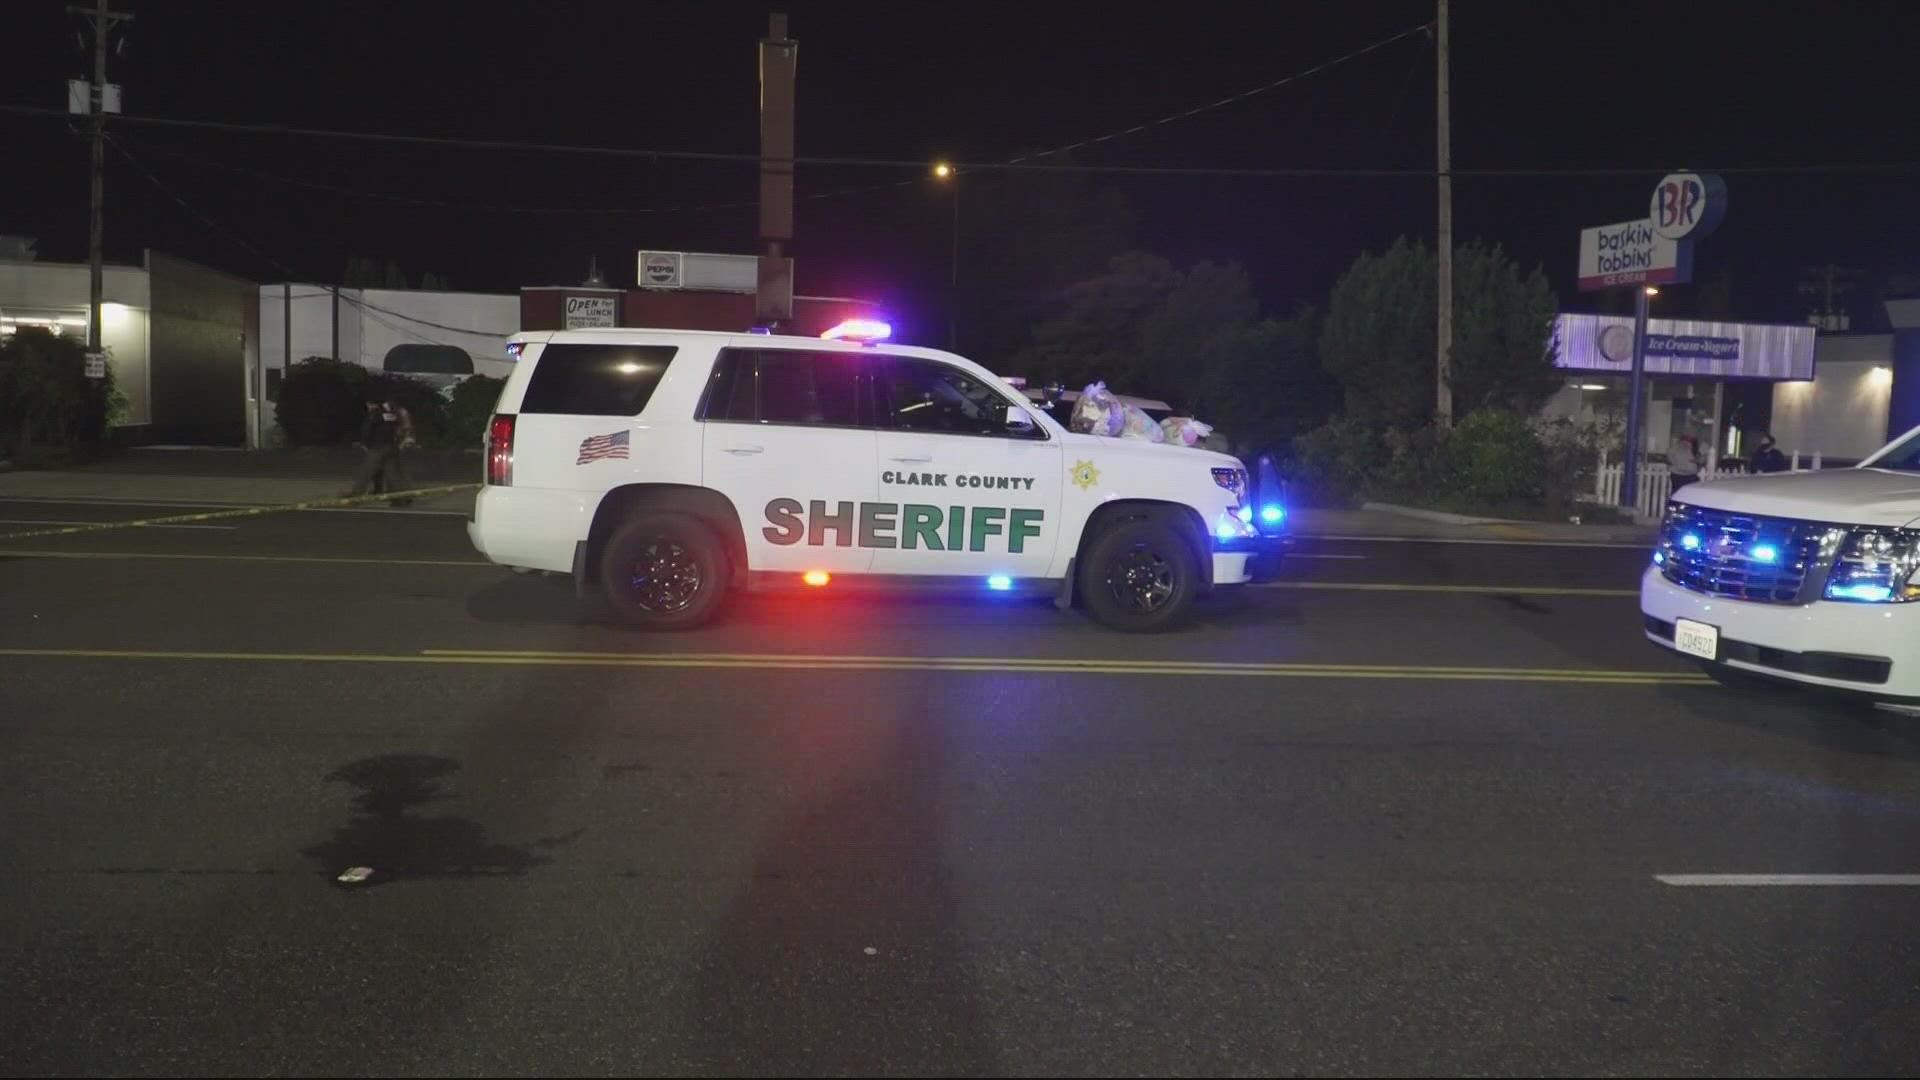 As of March 31, deputies will no longer respond to lower-level crime calls. Sheriff Chuck Atkins said the service cuts are prompted by staffing shortages.